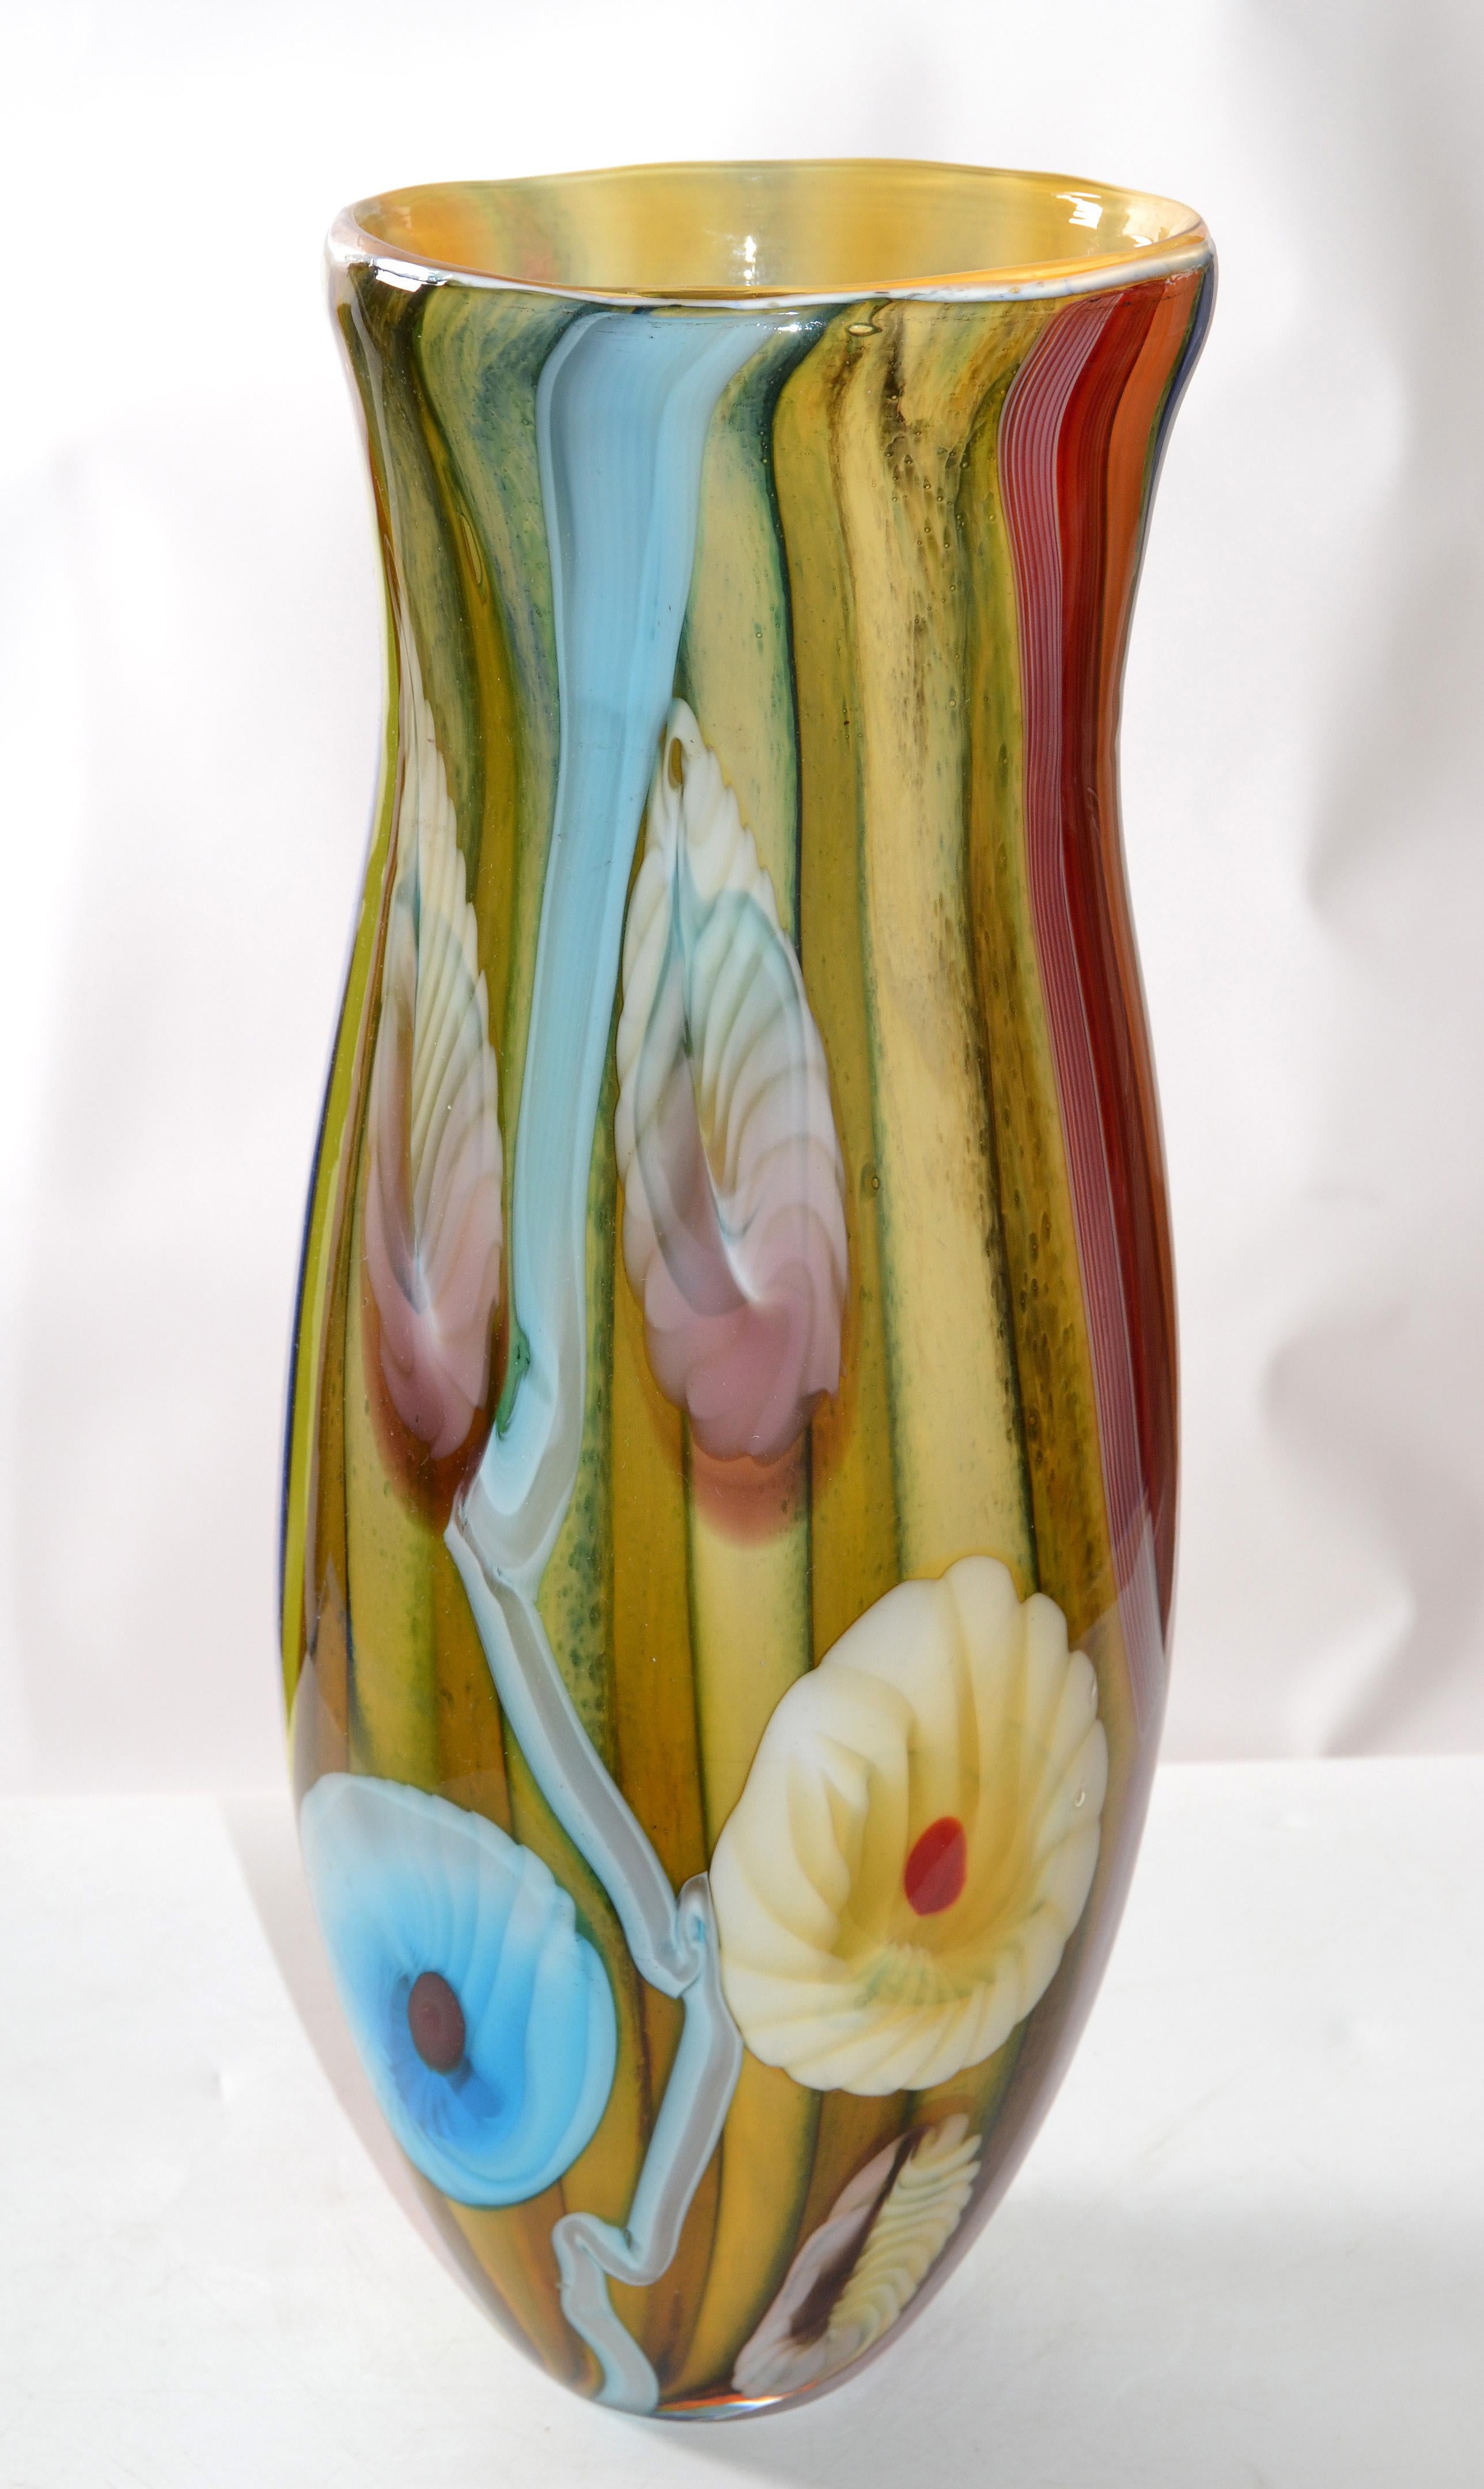 Polish Mid-Century Modern Art Glass Nautical Motif Tall Vase Made in Europe Poland 1980 For Sale